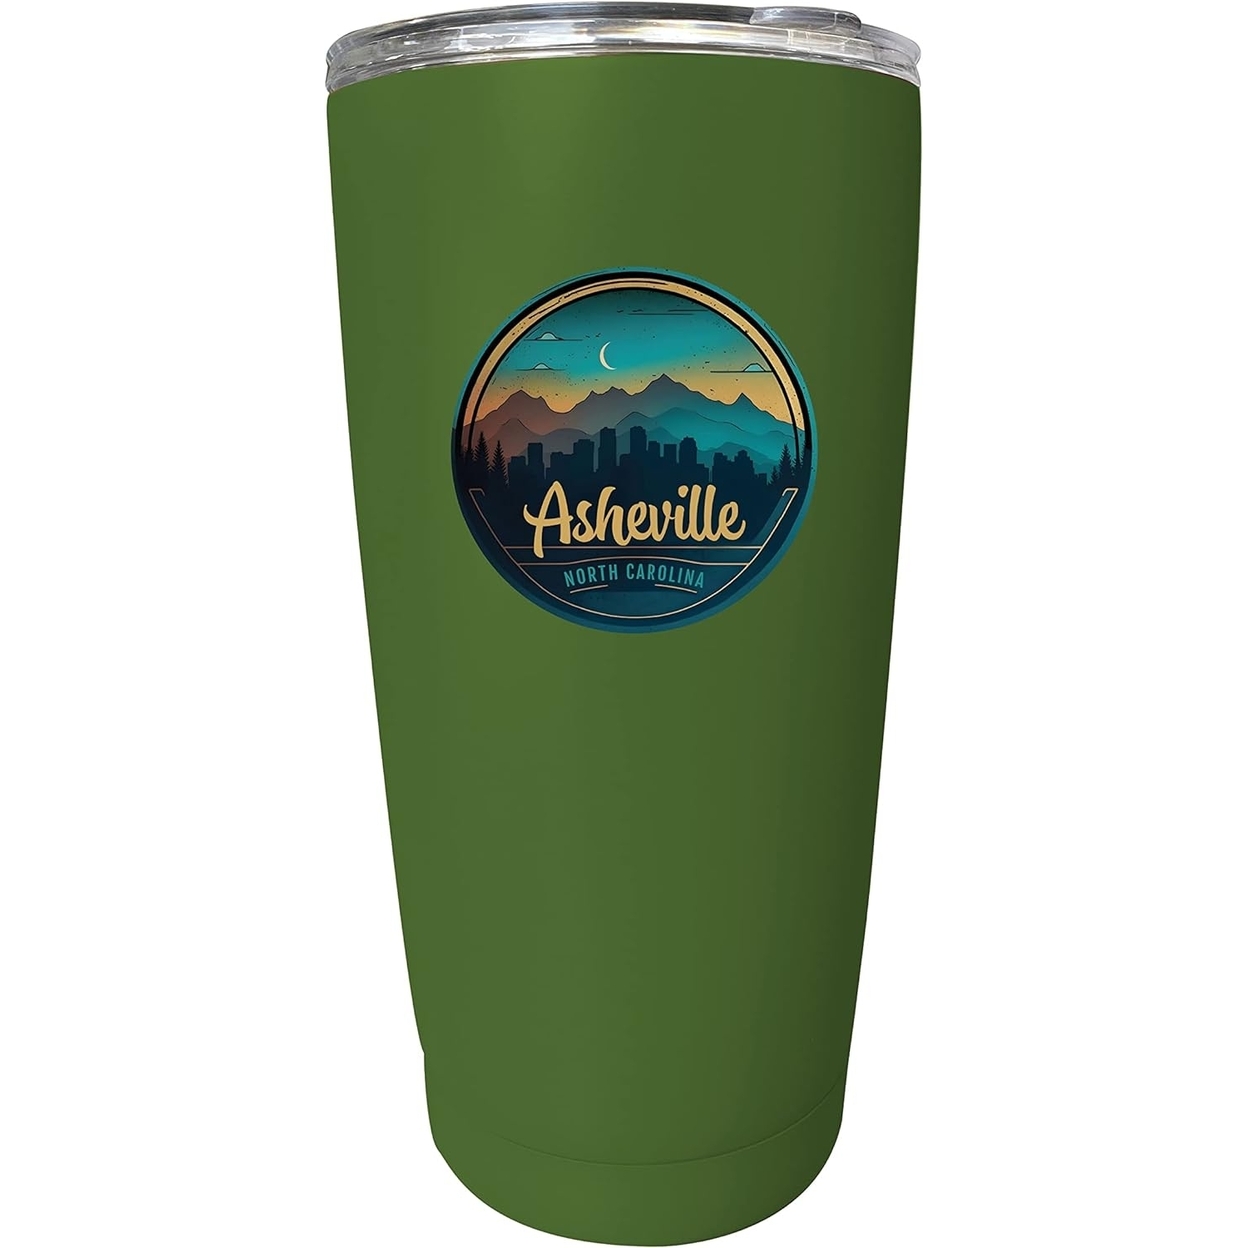 Asheville North Carolina Souvenir 16 Oz Stainless Steel Insulated Tumbler - Pink